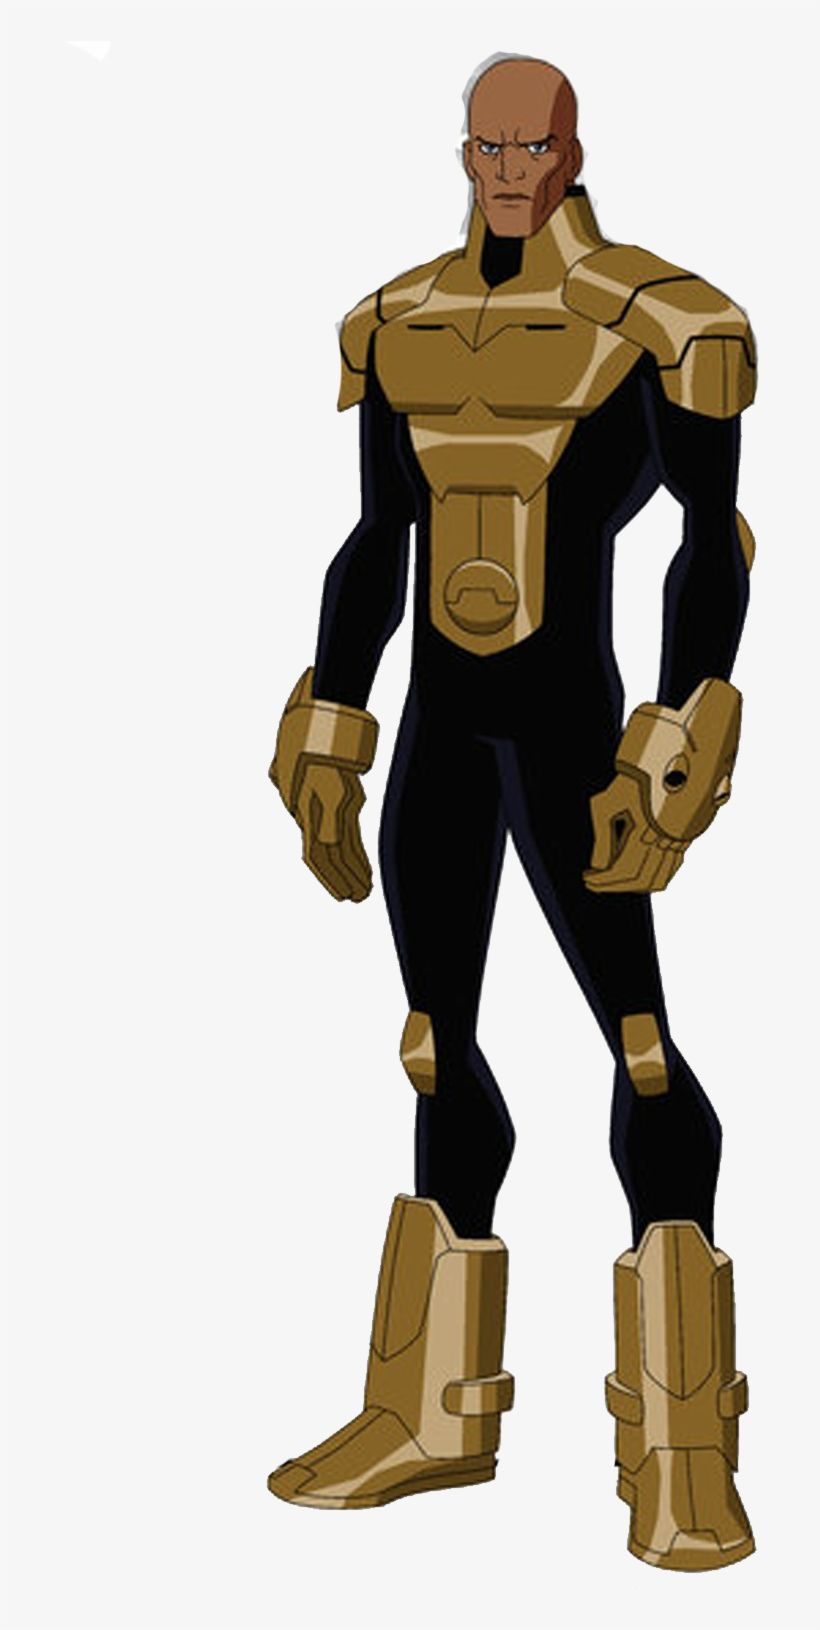 Lex Luthor Crisis On Two Earths PNG Image. Transparent PNG Free Download on SeekPNG